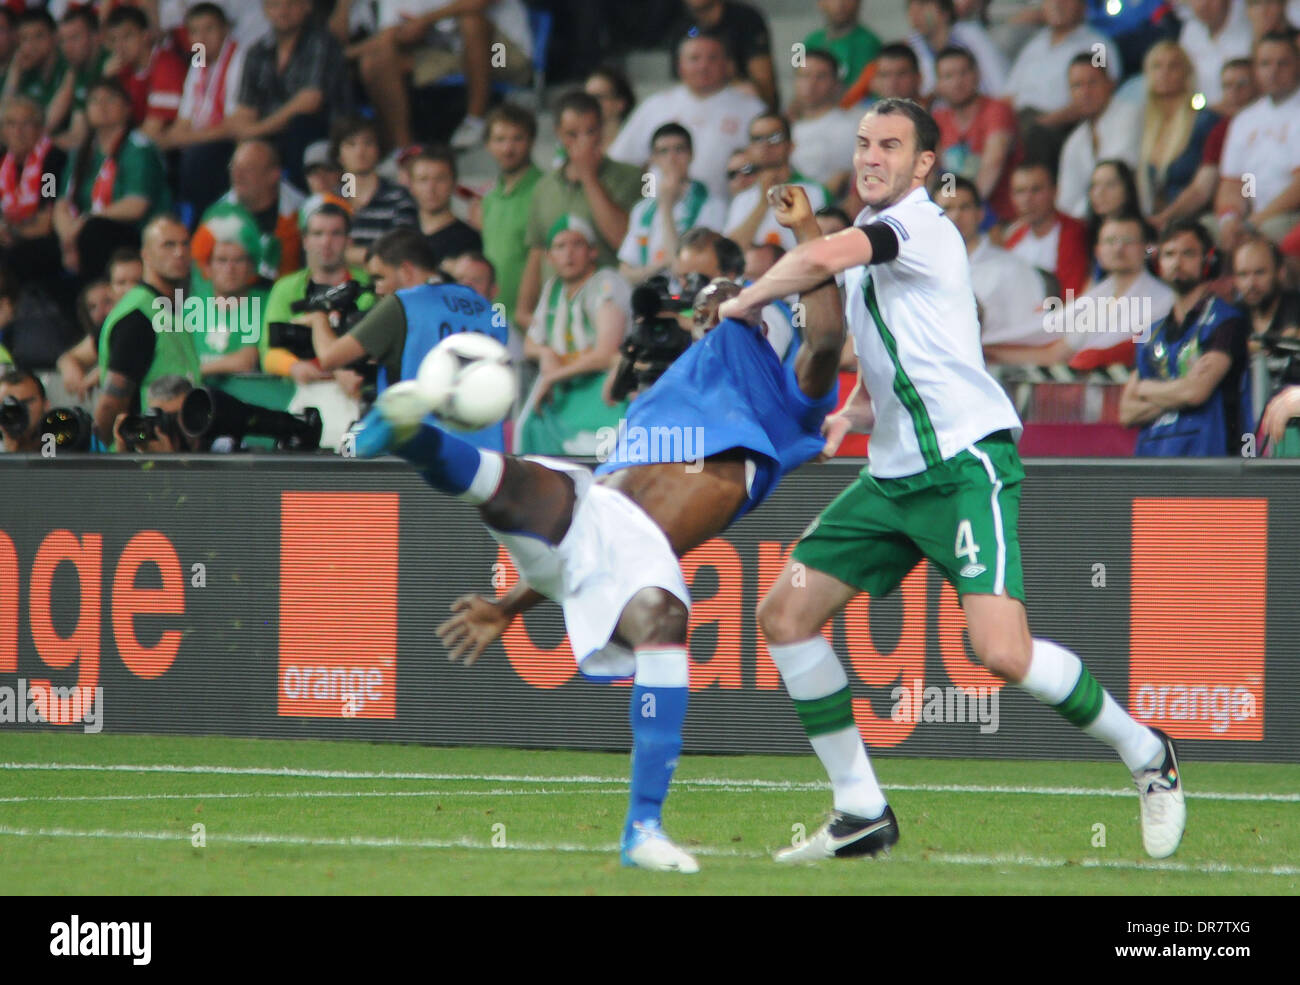 Mario Balotelli (Manchester City FC) scores for Italy  during the European Championship Group C game between Italy and Ireland at the Municipal Stadium. In Poznan, Poland on June 18, 2012. Italy won the match 2-0 Poznan, Poland - 18.06.12 Stock Photo